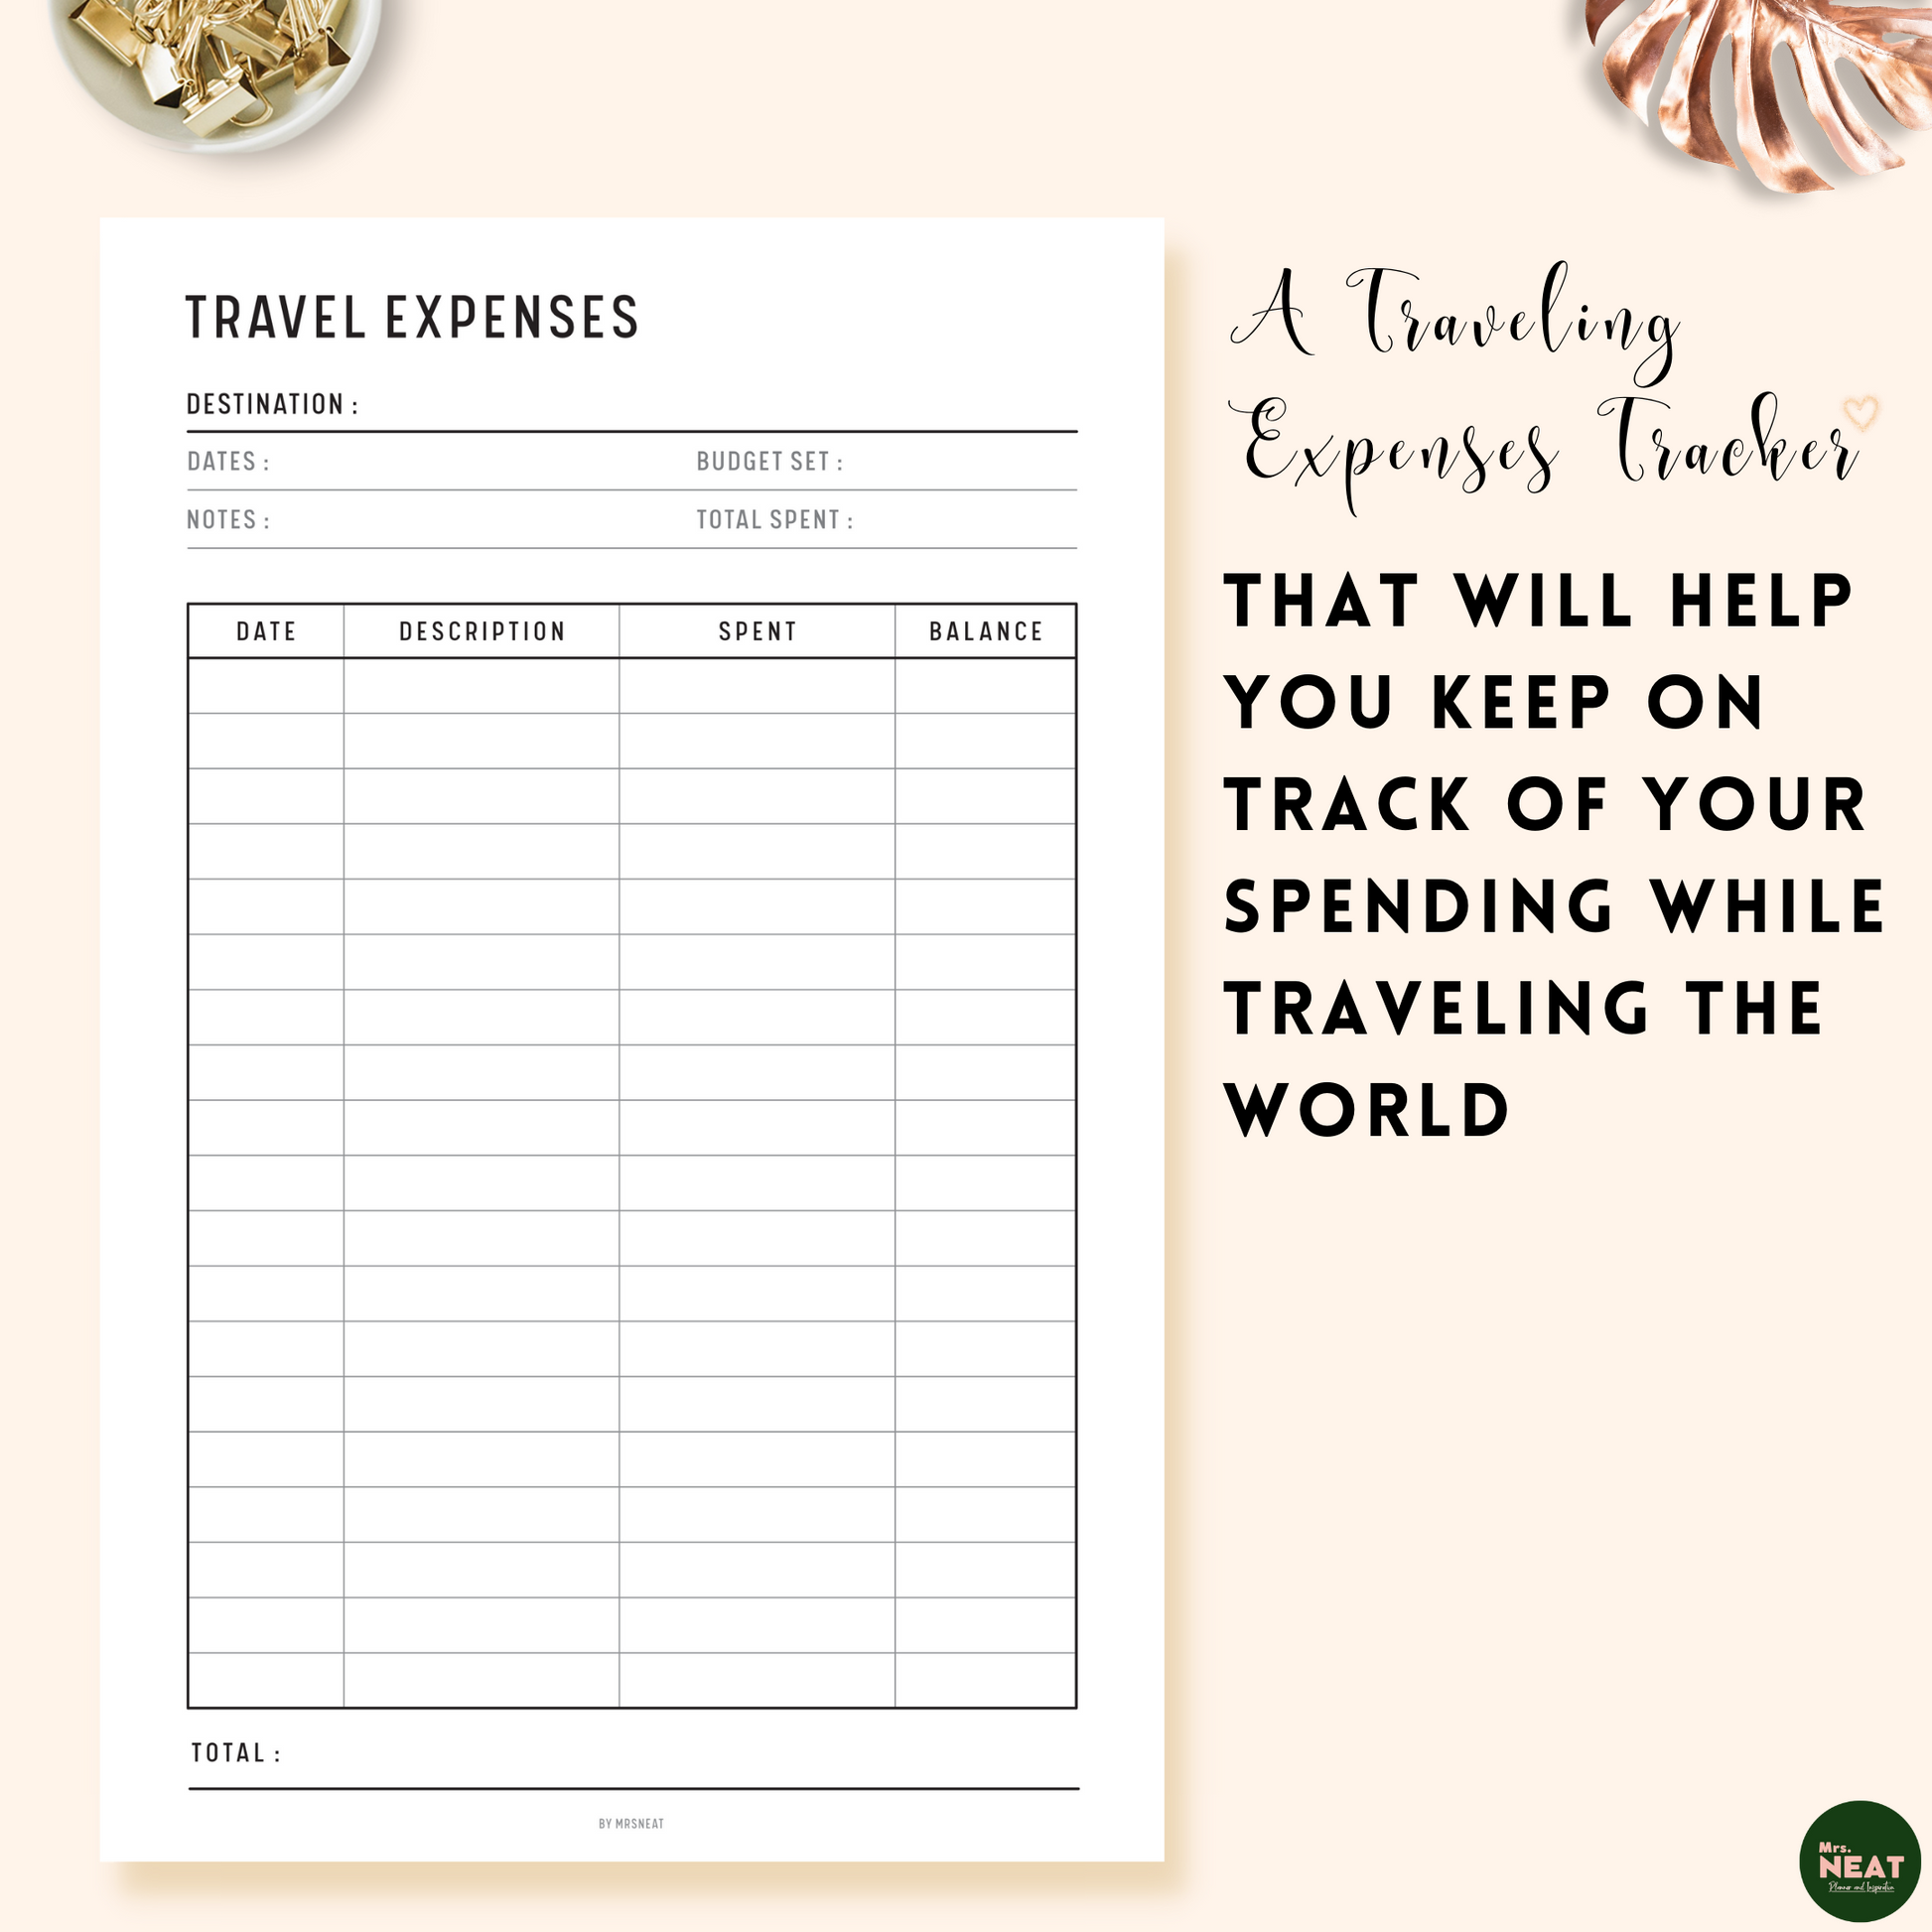 Travel Expenses Tracker Planner to help keep on track of spending while traveling the world